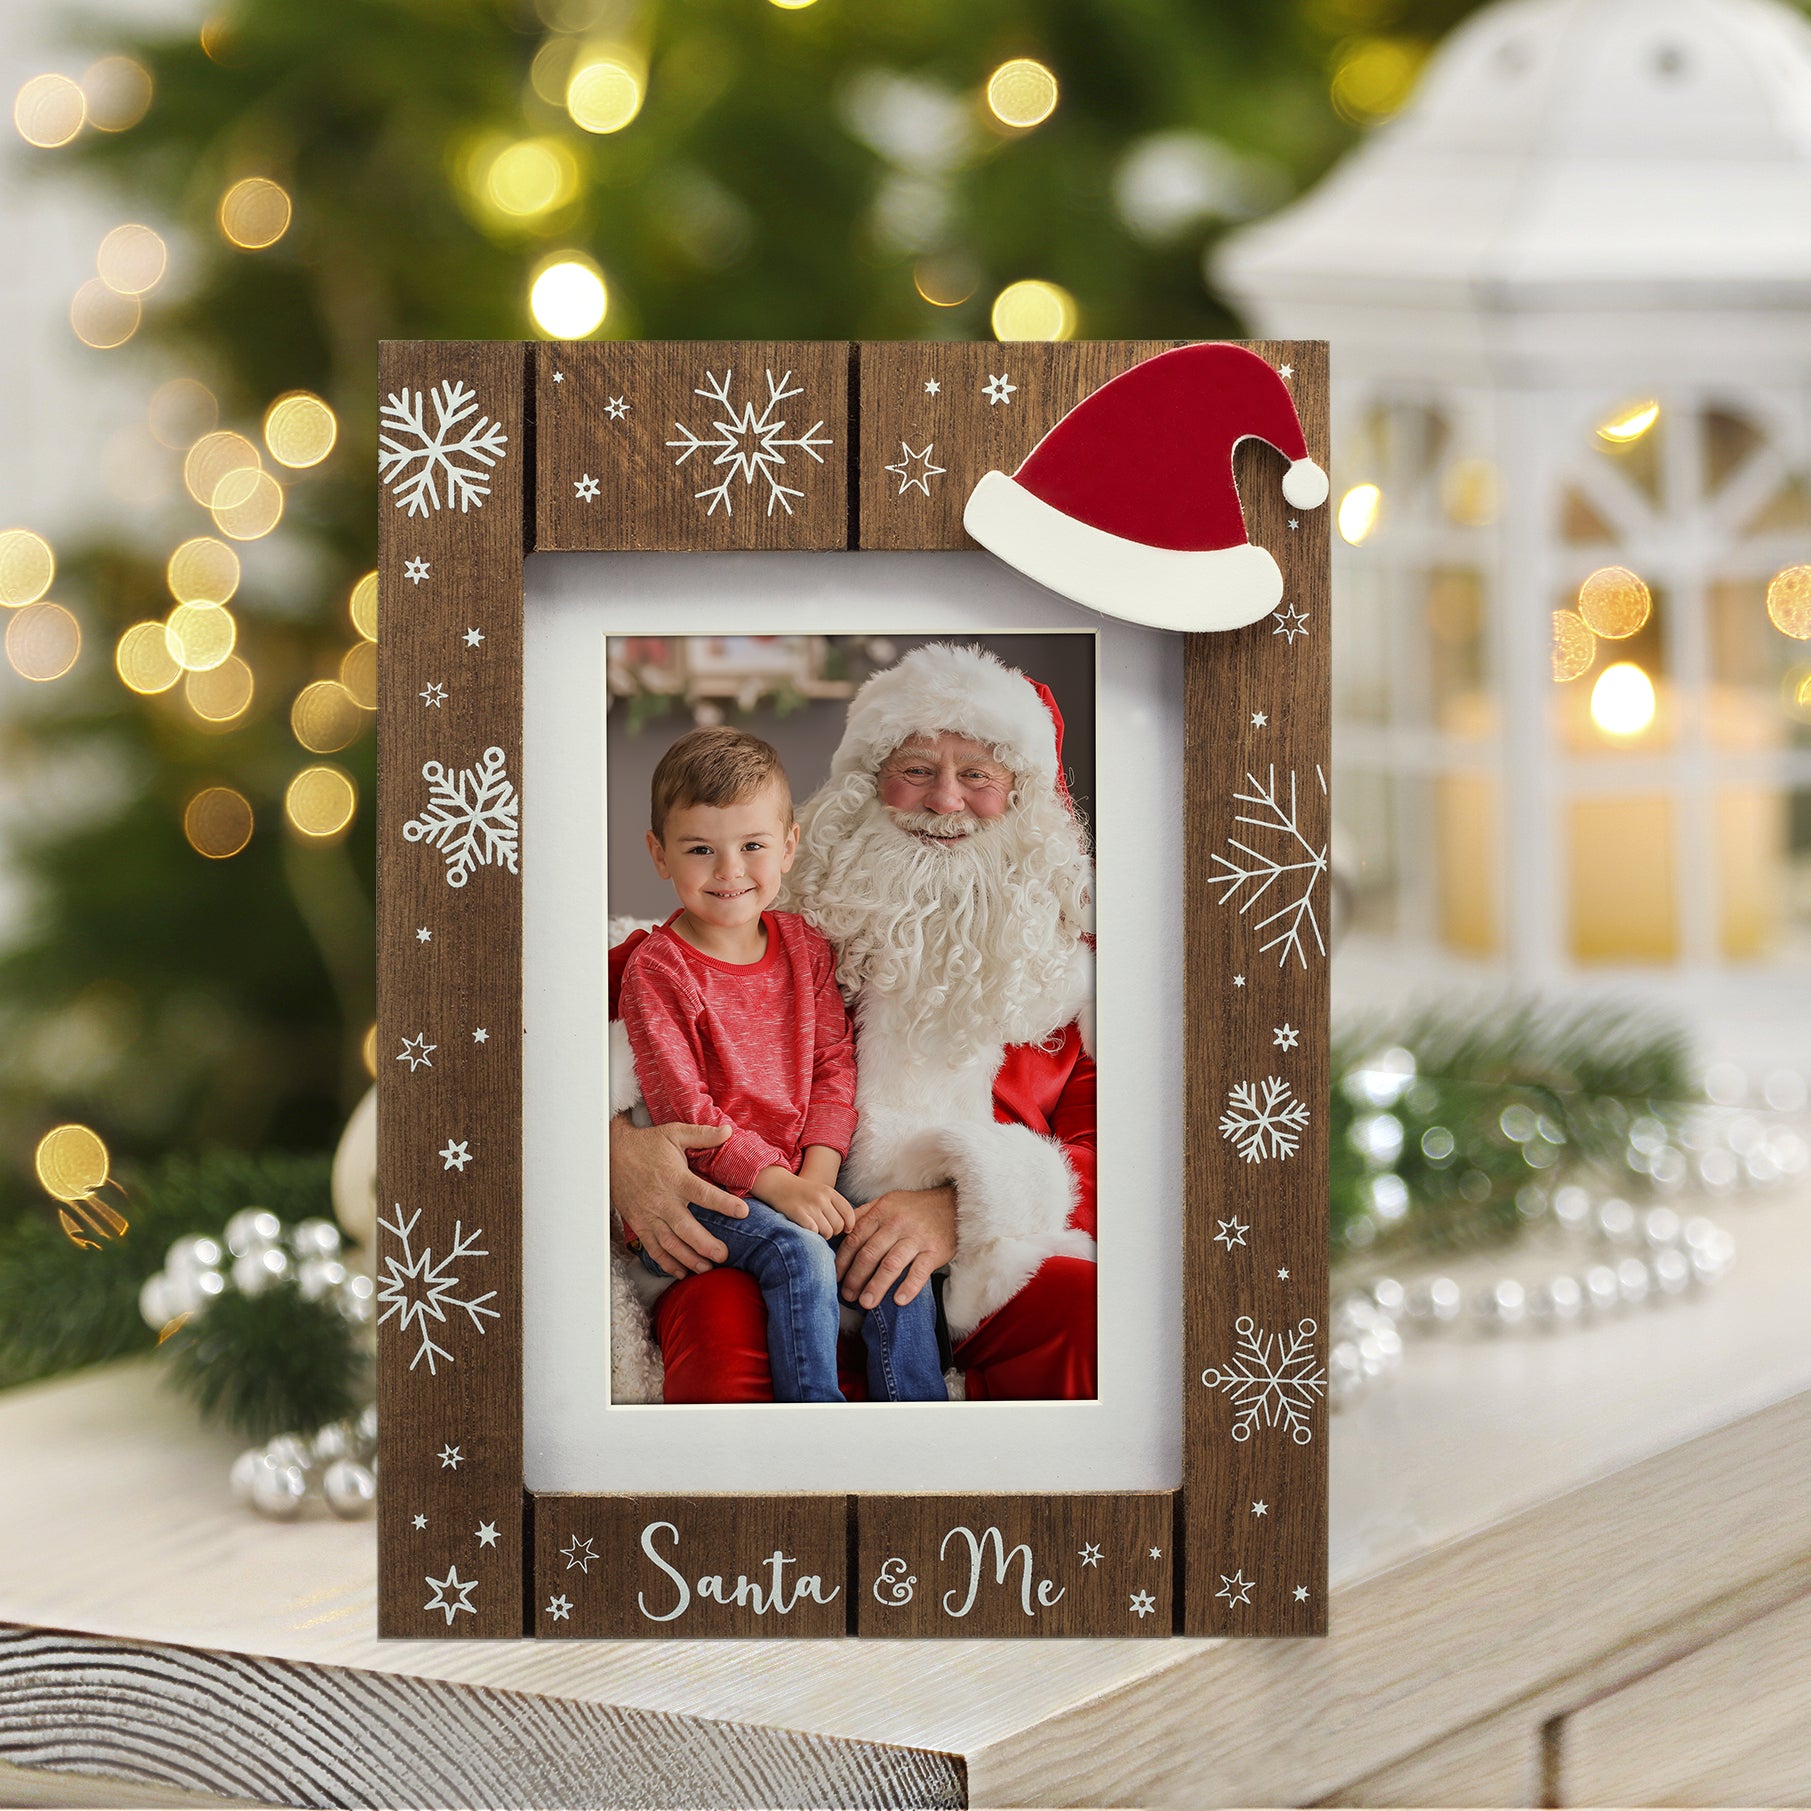 Santa and Me Wood Picture Frames